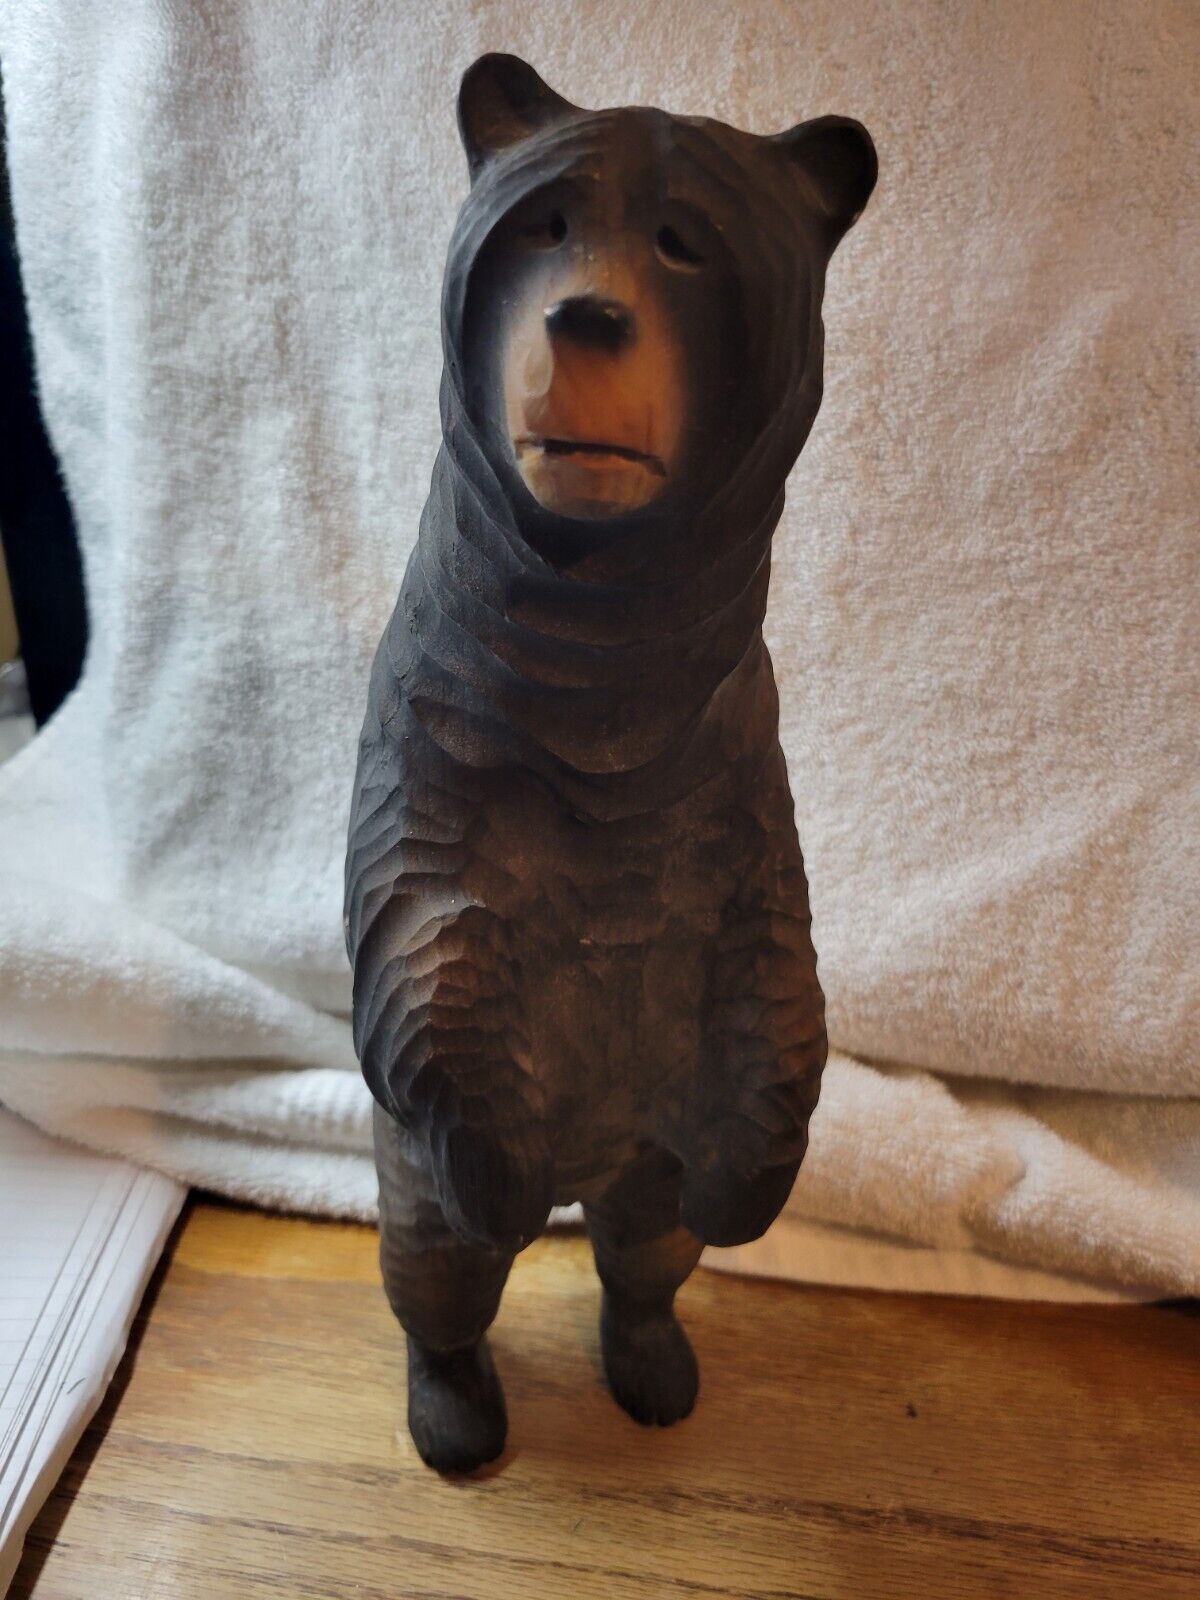 Carved wood bear statue